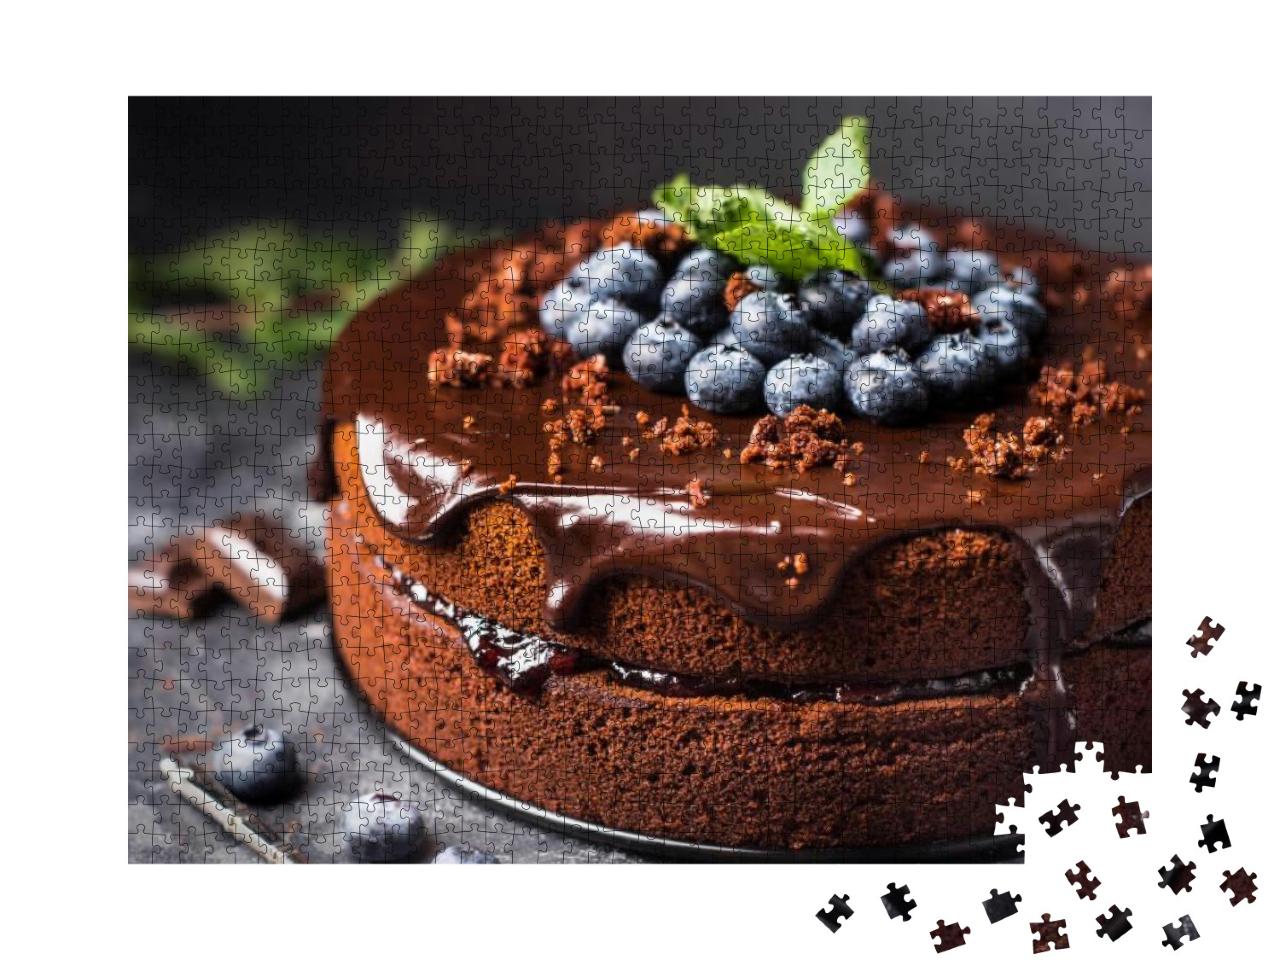 Chocolate Cake with Berries... Jigsaw Puzzle with 1000 pieces